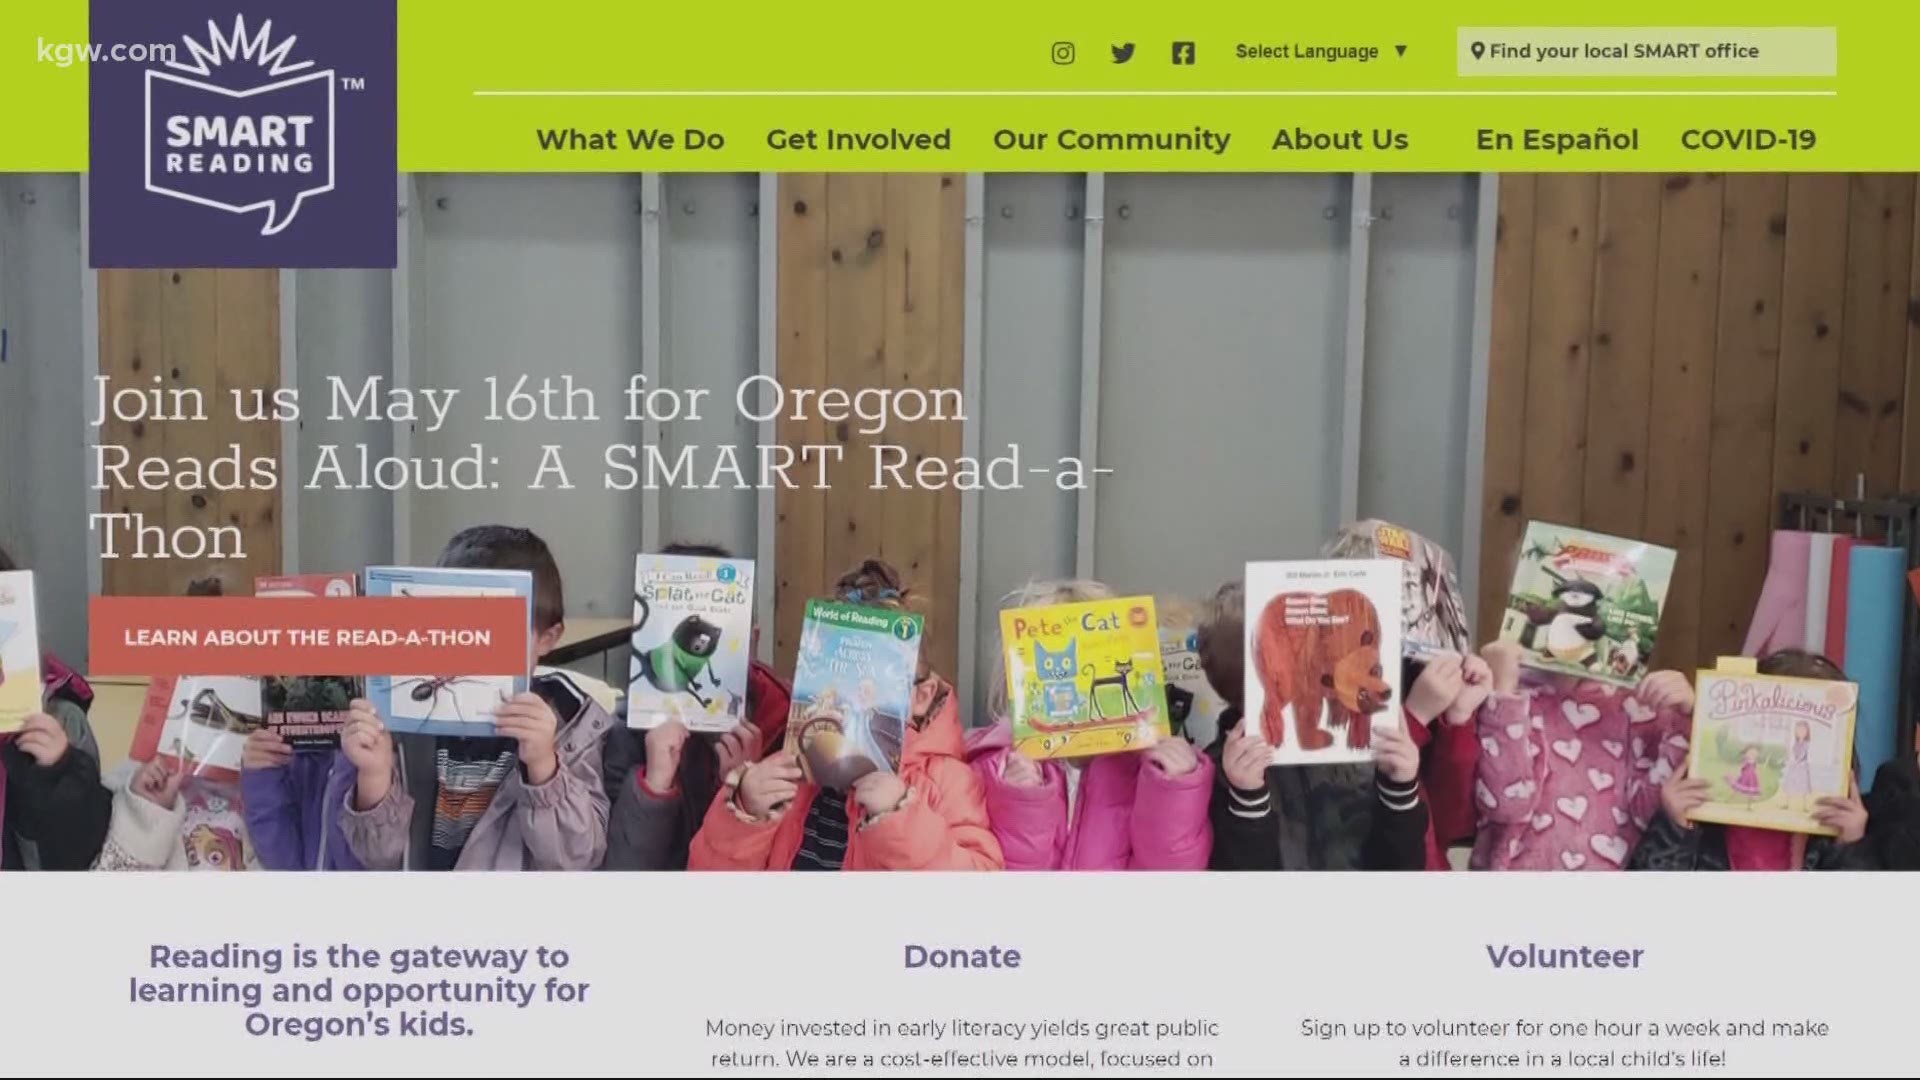 Even with schools closed, SMART has still been able to get more than 10,000 books to kids across Oregon in the last month.